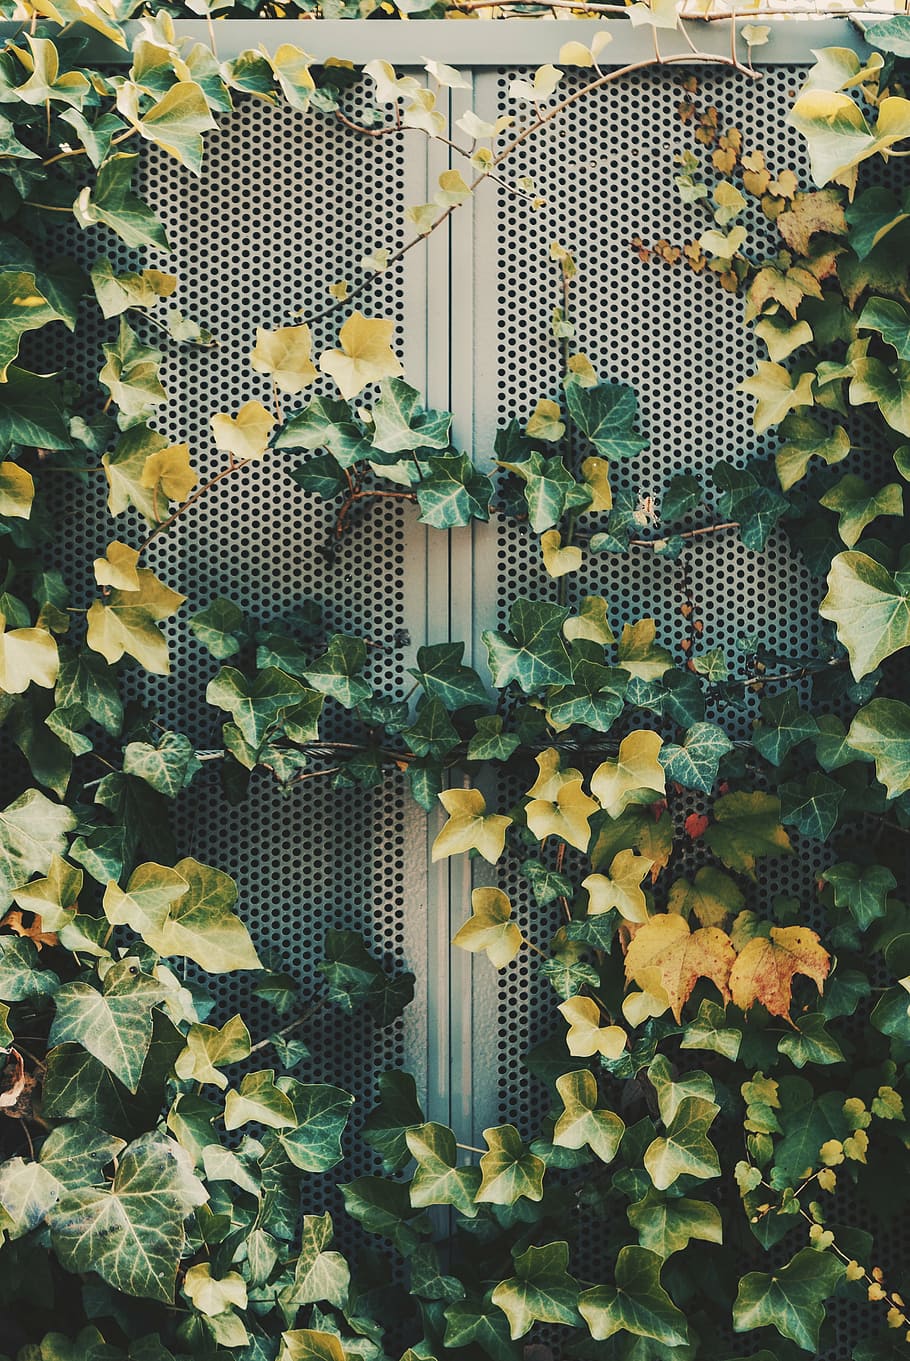 green, yellow, leaves, gray, surface, leaf, plant, nature, outdoor, vines